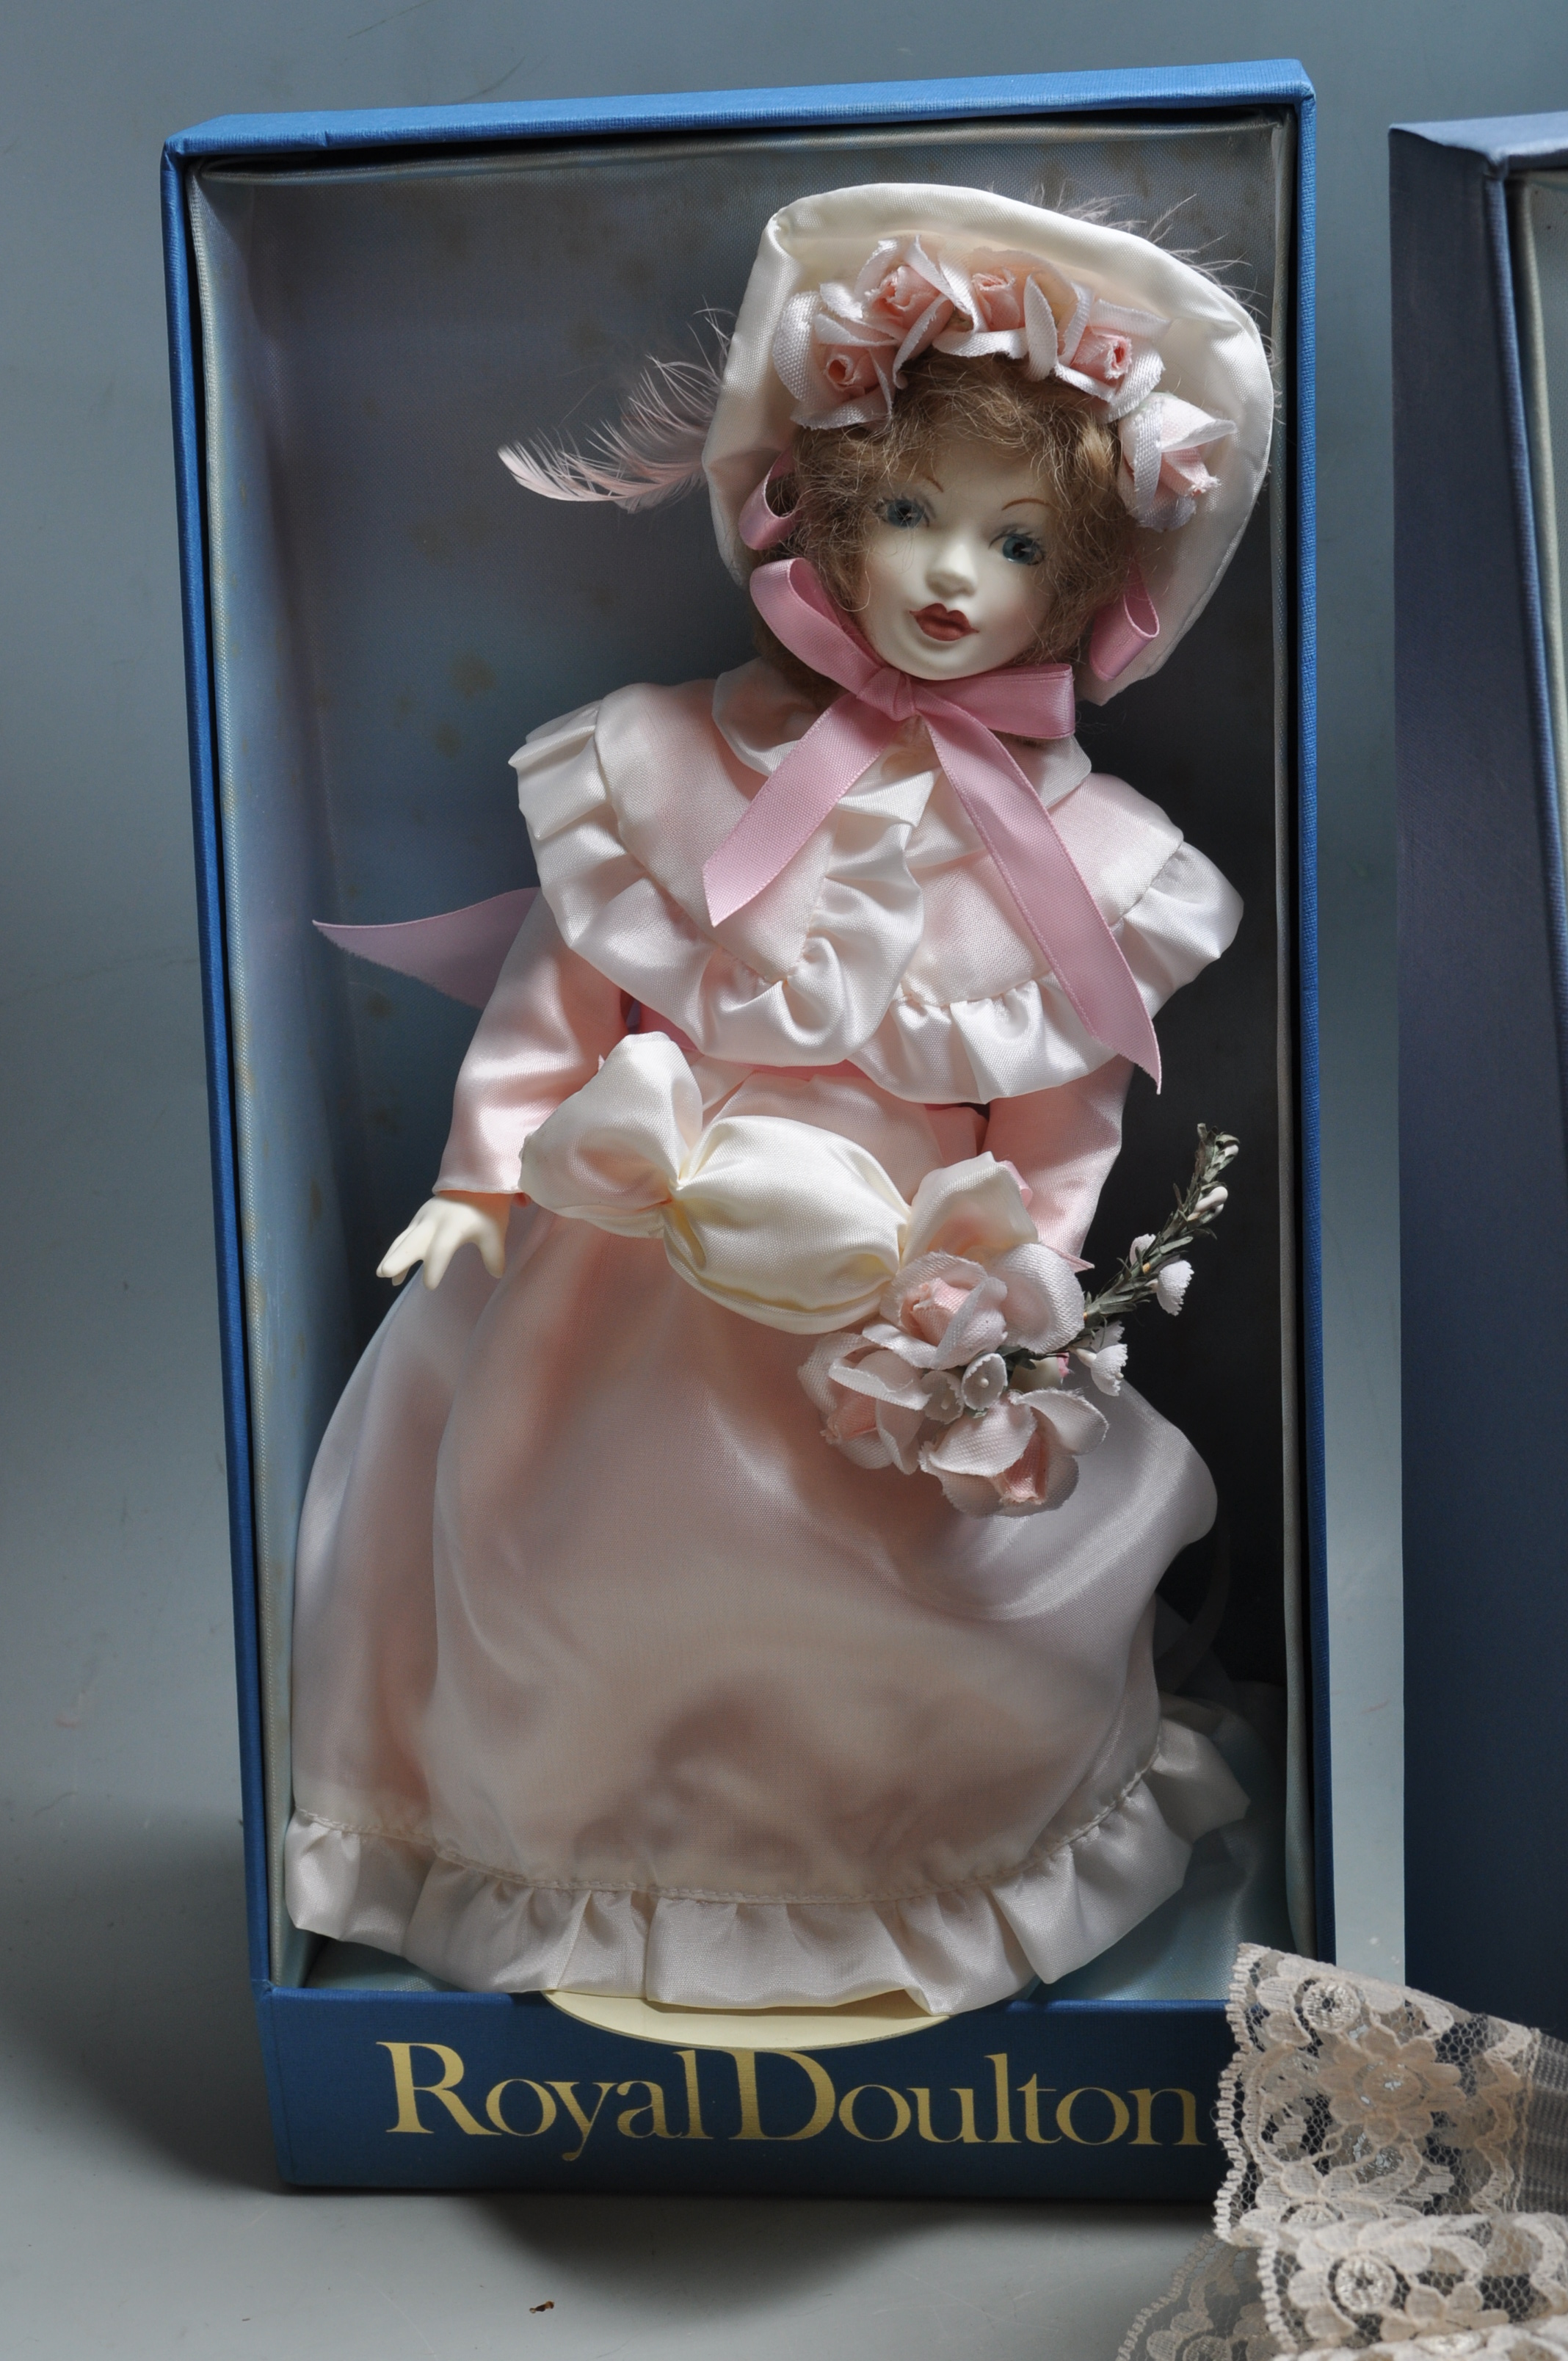 GROUP OF ROYAL DOULTON AND DANBURY MINT DOLLS - Image 7 of 9